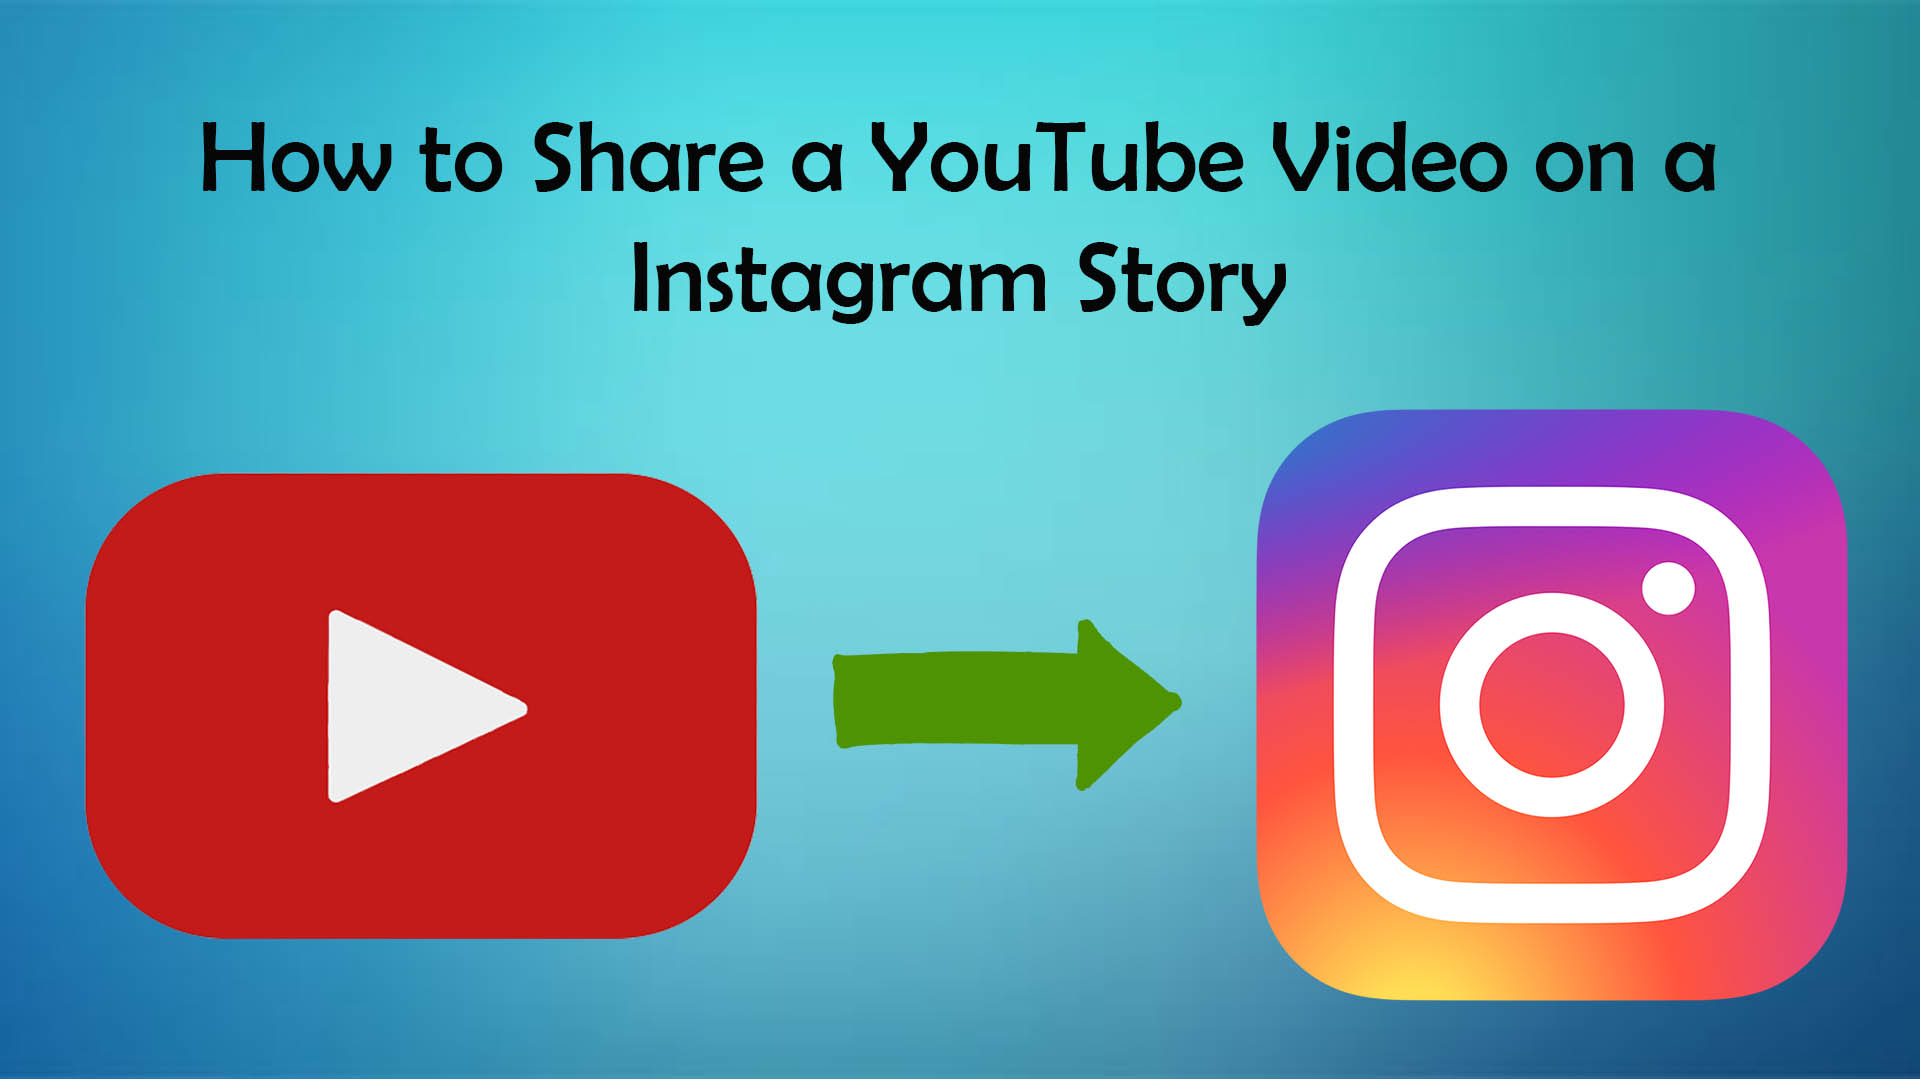 How to Share a YouTube Video on Instagram Story – 2 Methods